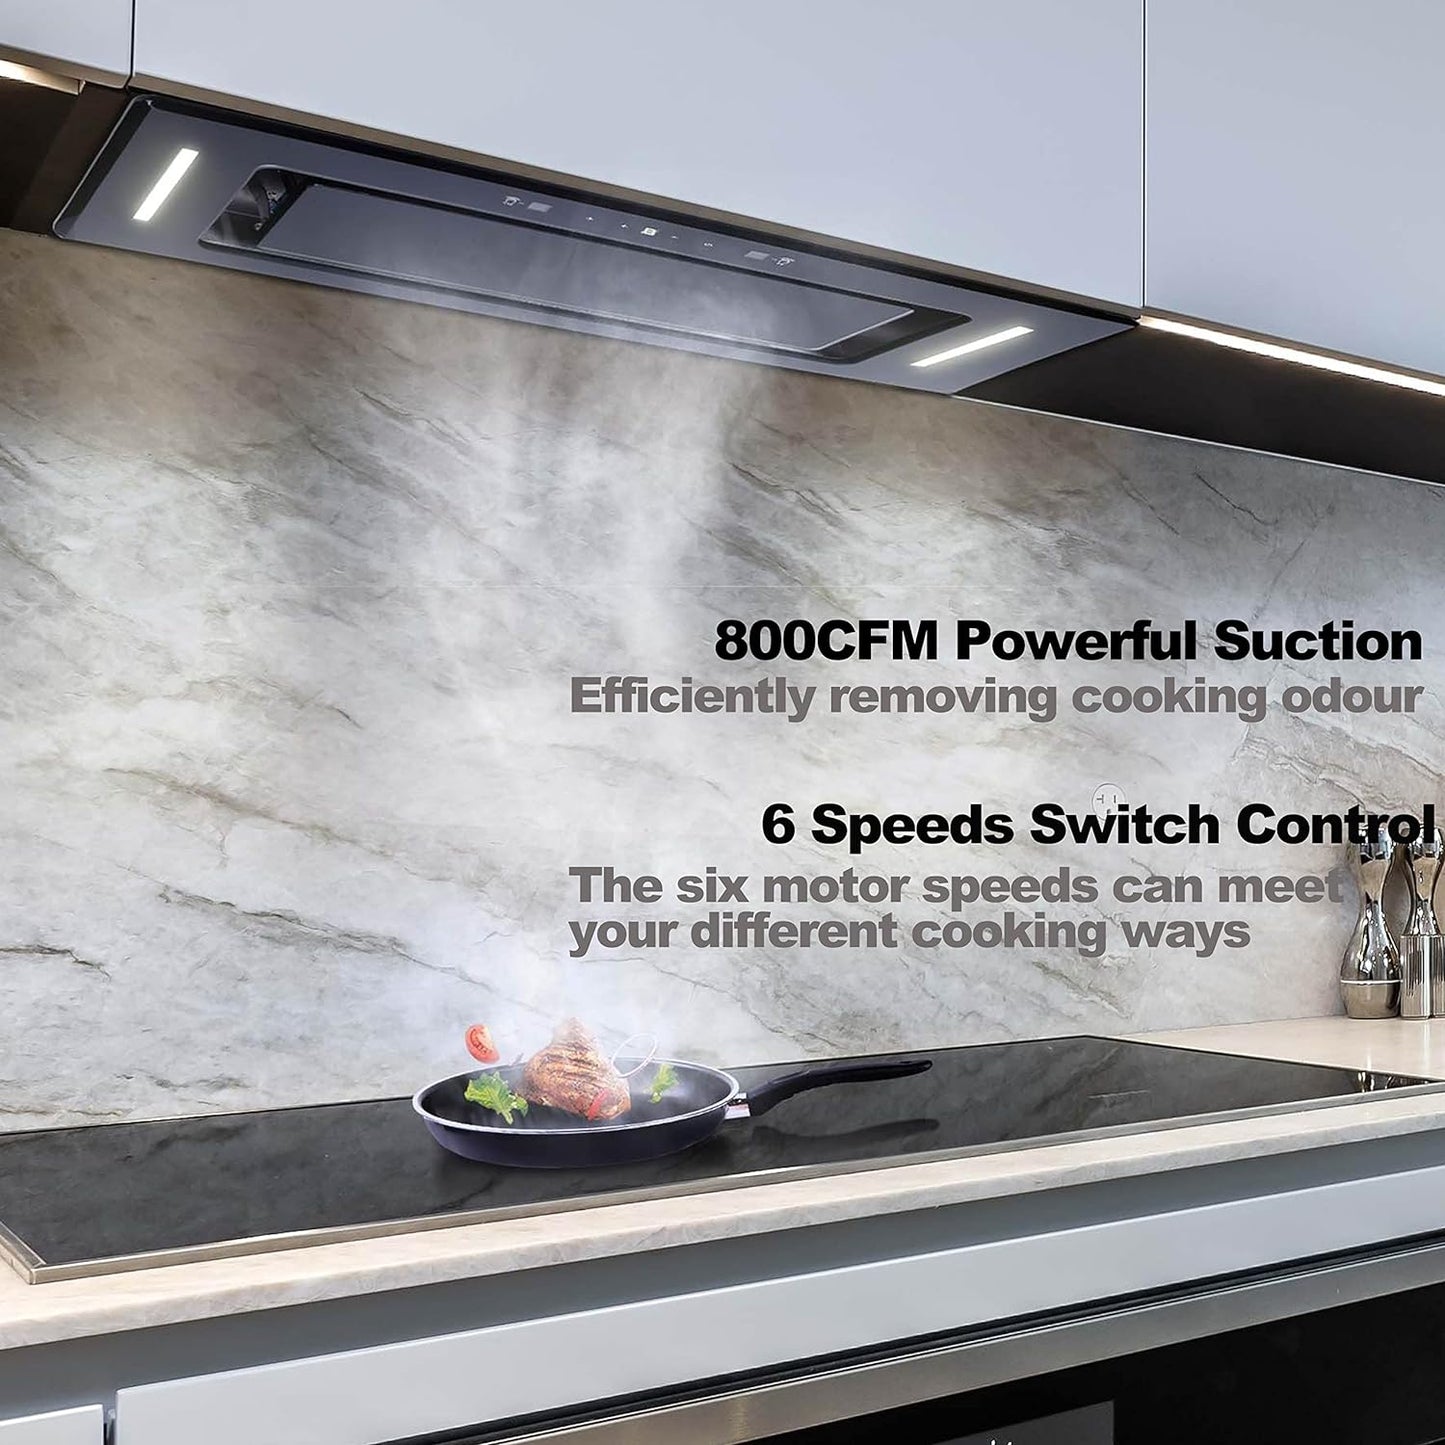 EVERKITCH Insert 30inch Range Hood with Powerful yet Quite Brushless DC Motor, Black Glass, Built in Stove Hood, Stainless steel Filter, Kitchen Vent Hood with 6 Sp